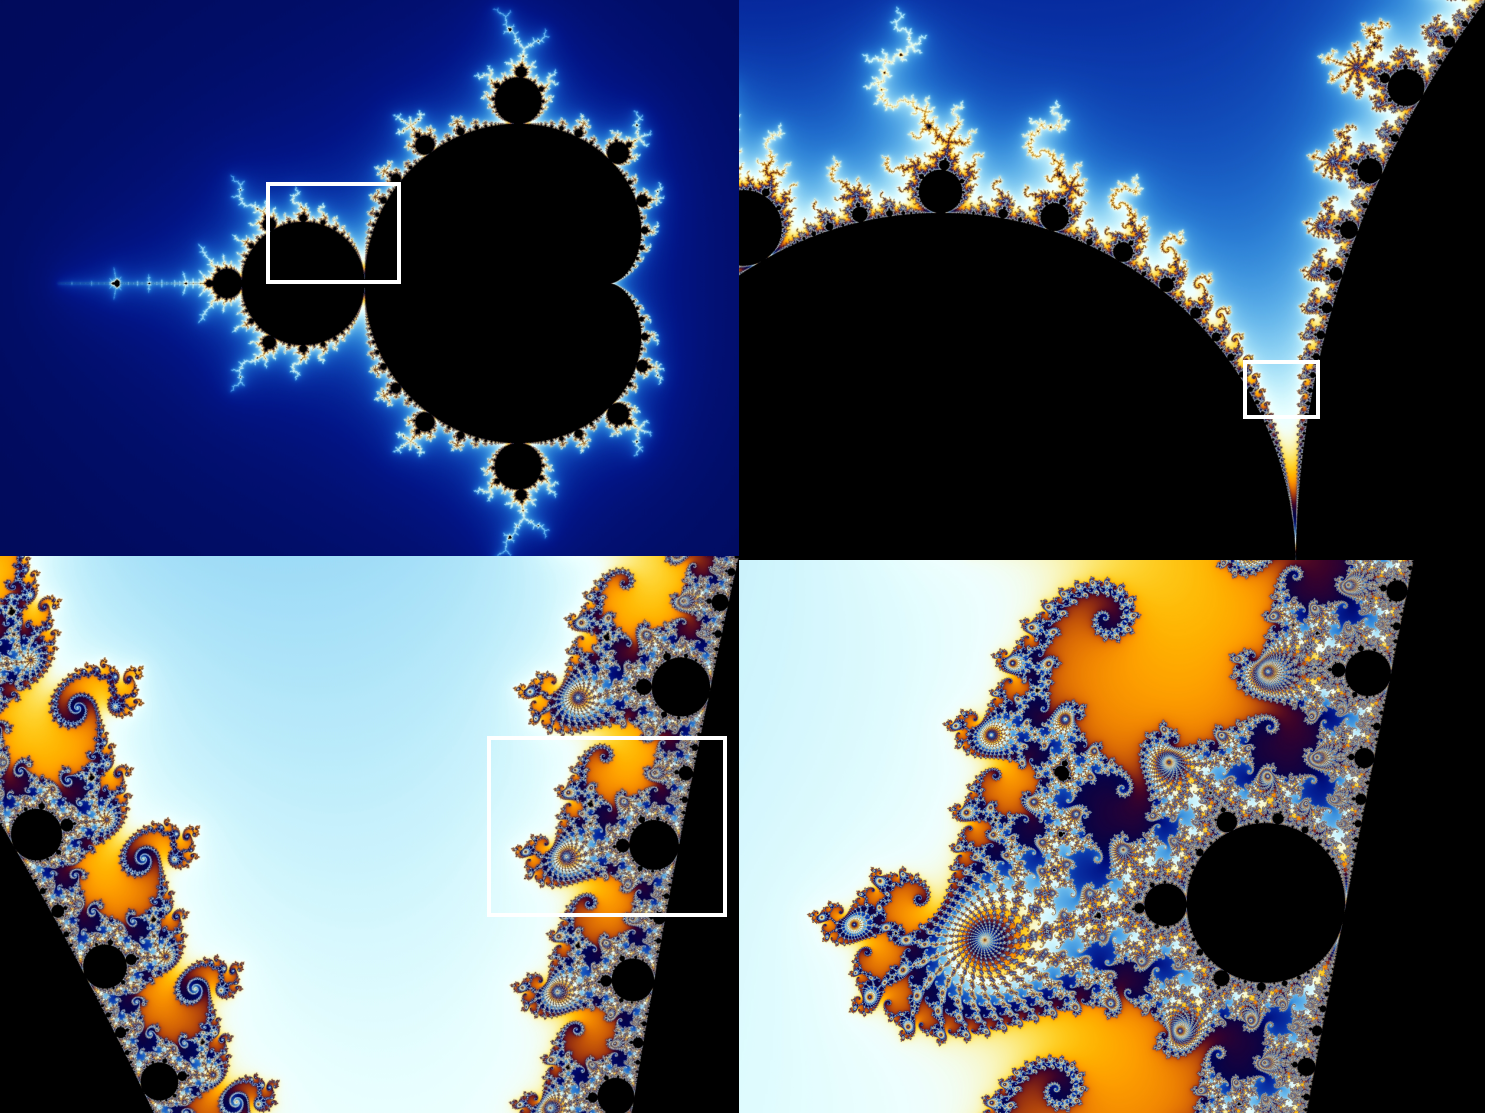 Magnifying the structure of the Mandelbrot Set Image credit: Wolfgang Beyer with the program Ultra Fractal 3